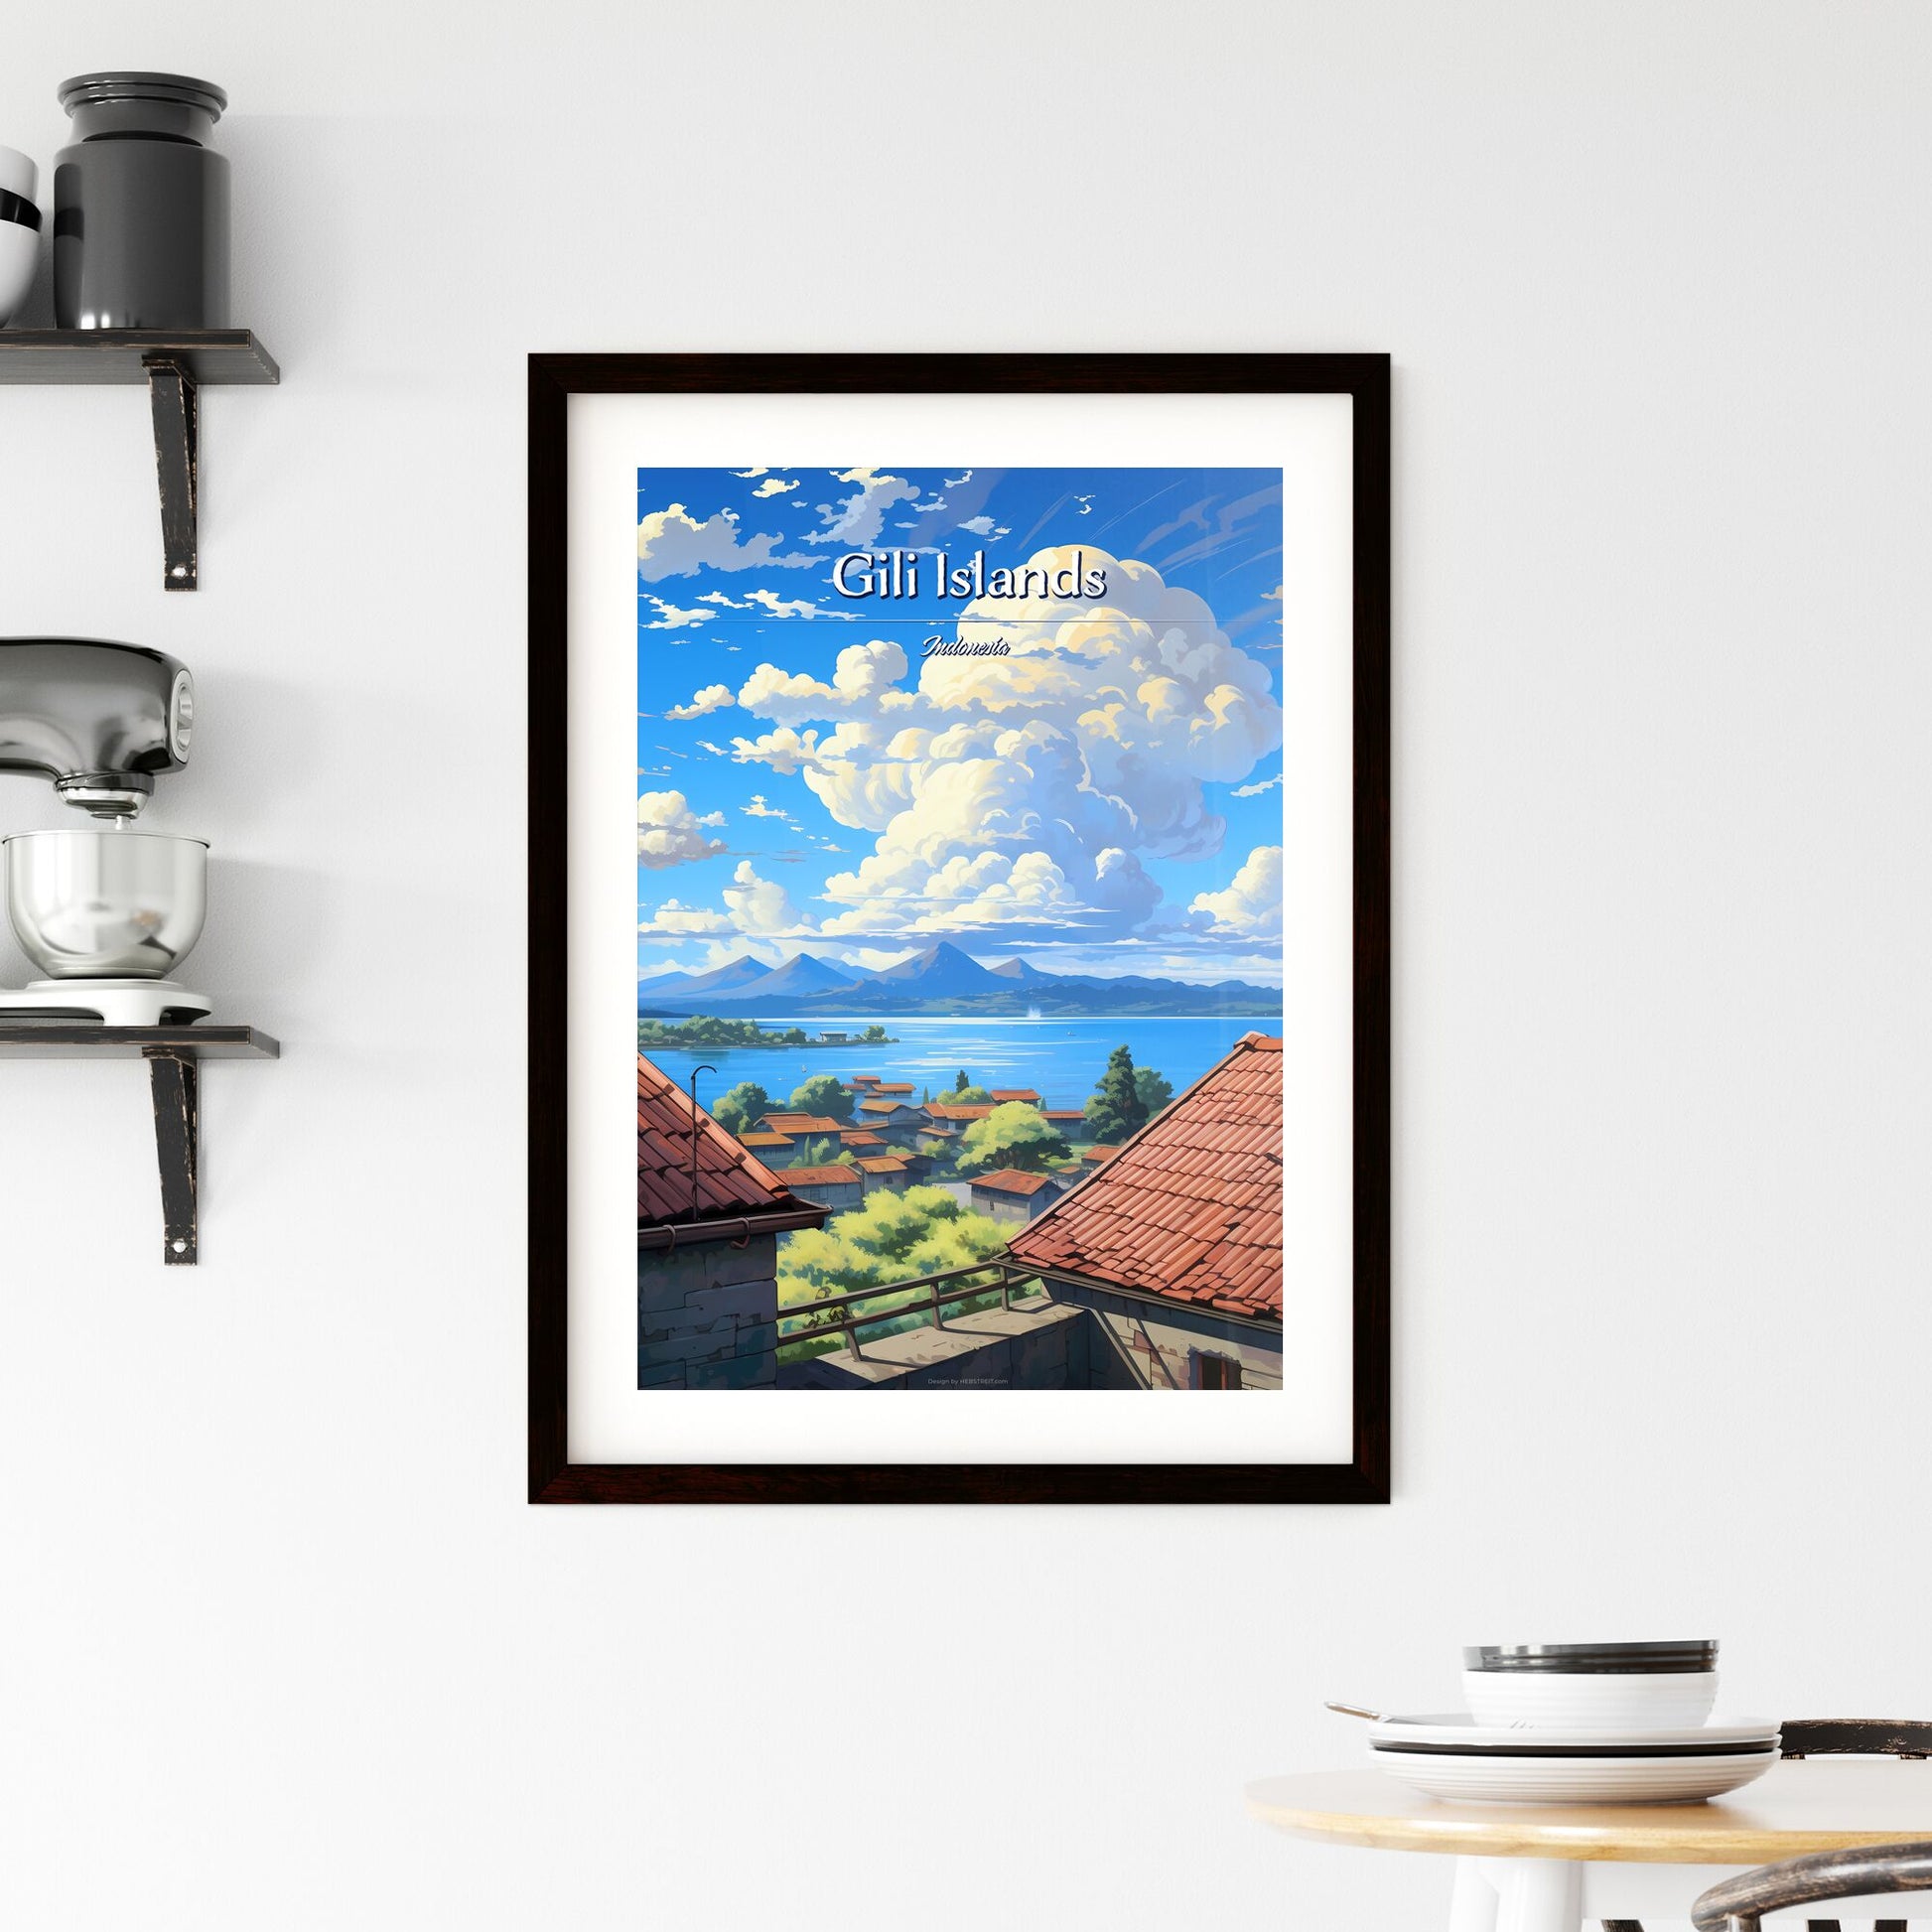 On the roofs of Gili Islands, Indonesia - Art print of a rooftops of a town overlooking a body of water Default Title